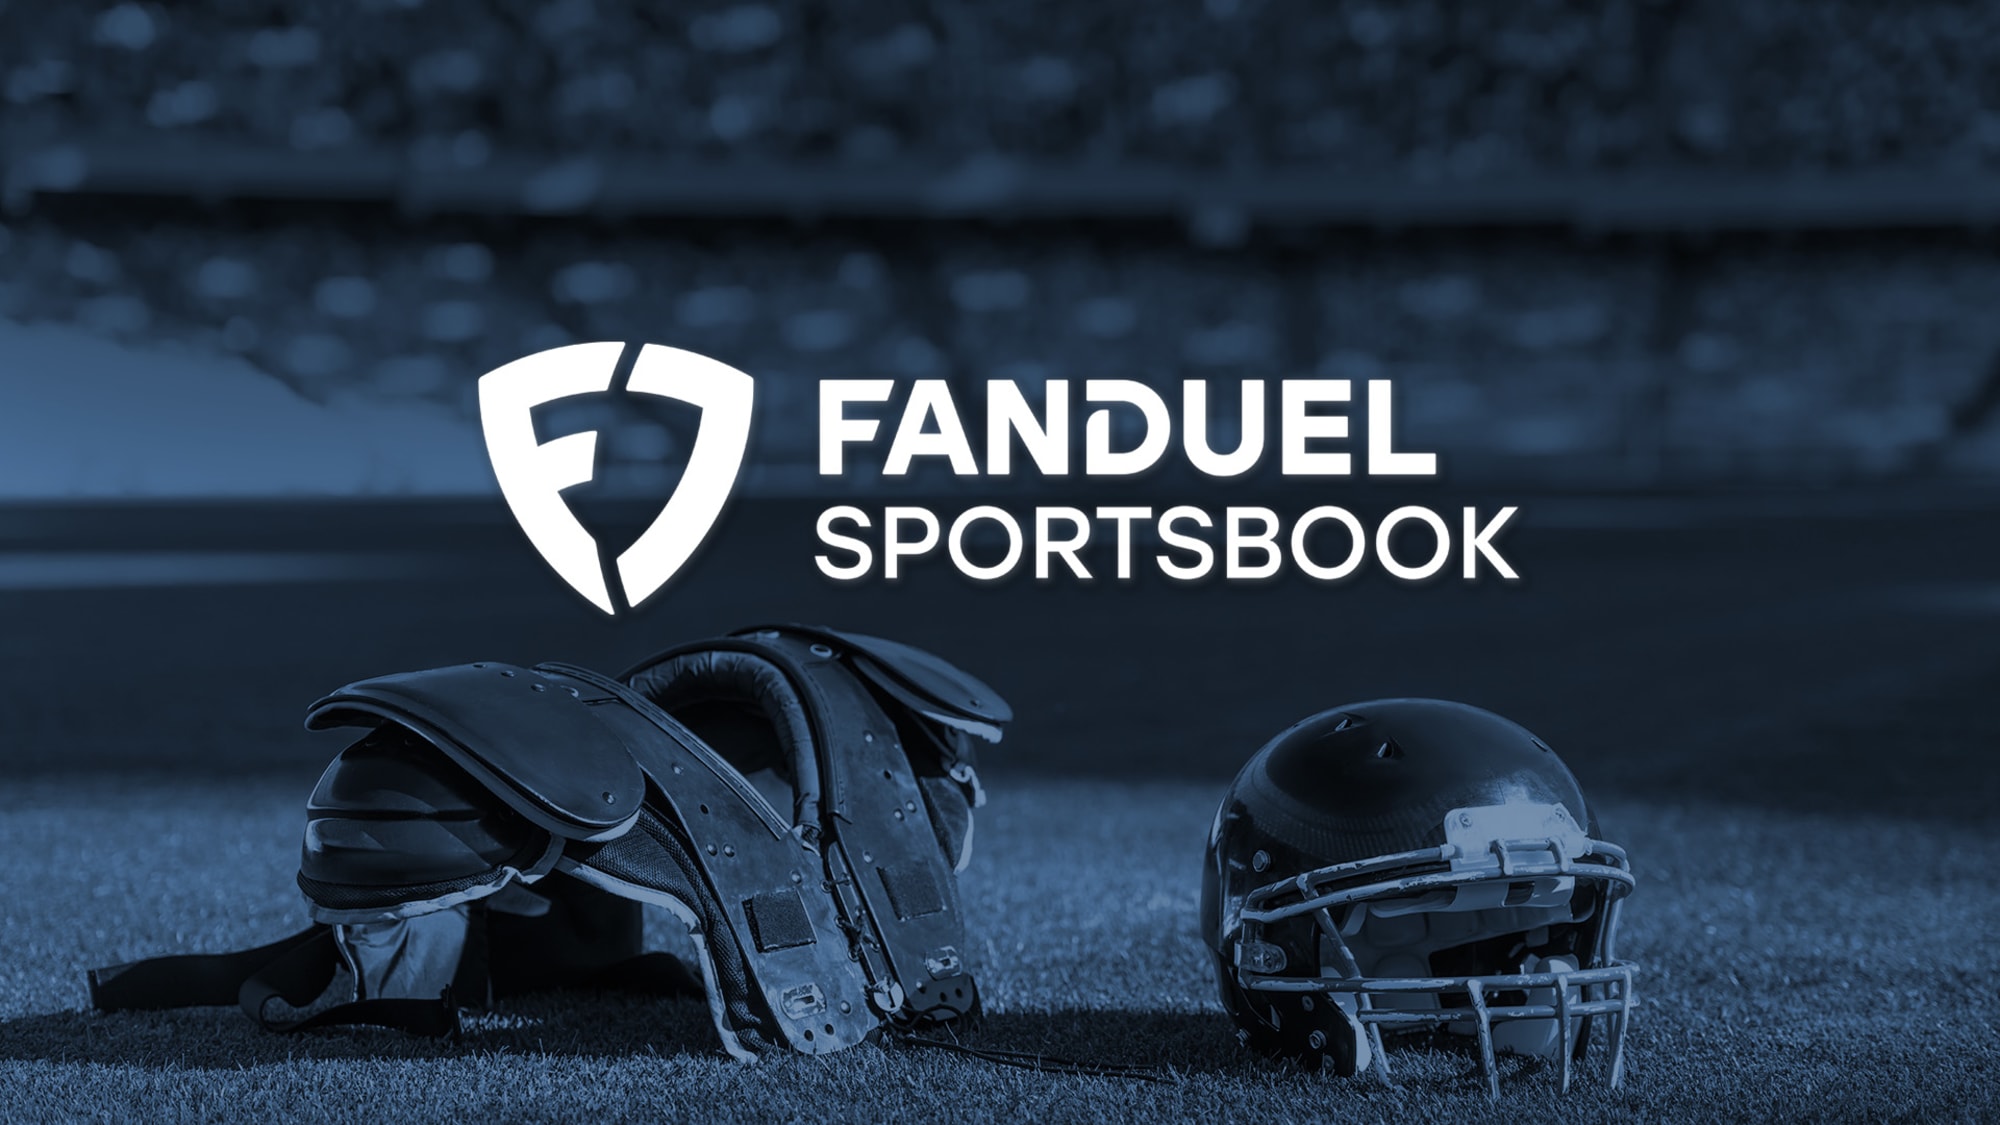 FanDuel Sportsbook on X: One of our customers wagered $10 on this